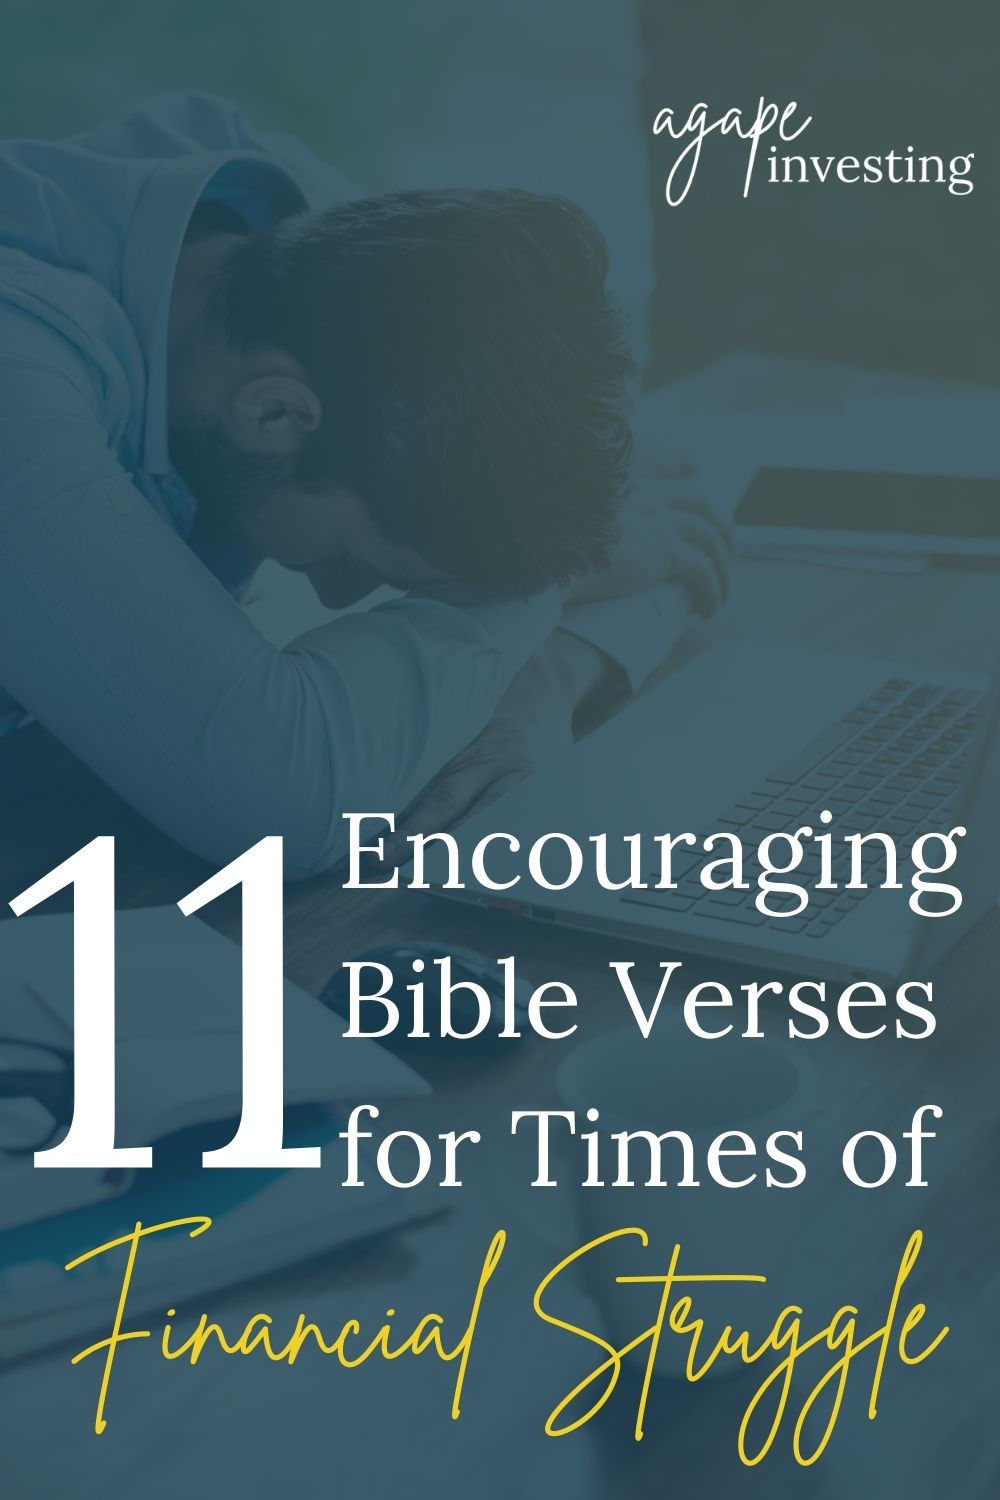  We all go through times of financial problems. The good news is there is hope found in Jesus Christ. Check out these 11 encouraging Bible verses for times of financial struggle and learn more about how you can have your very on financial breakthrough using biblical principles. 